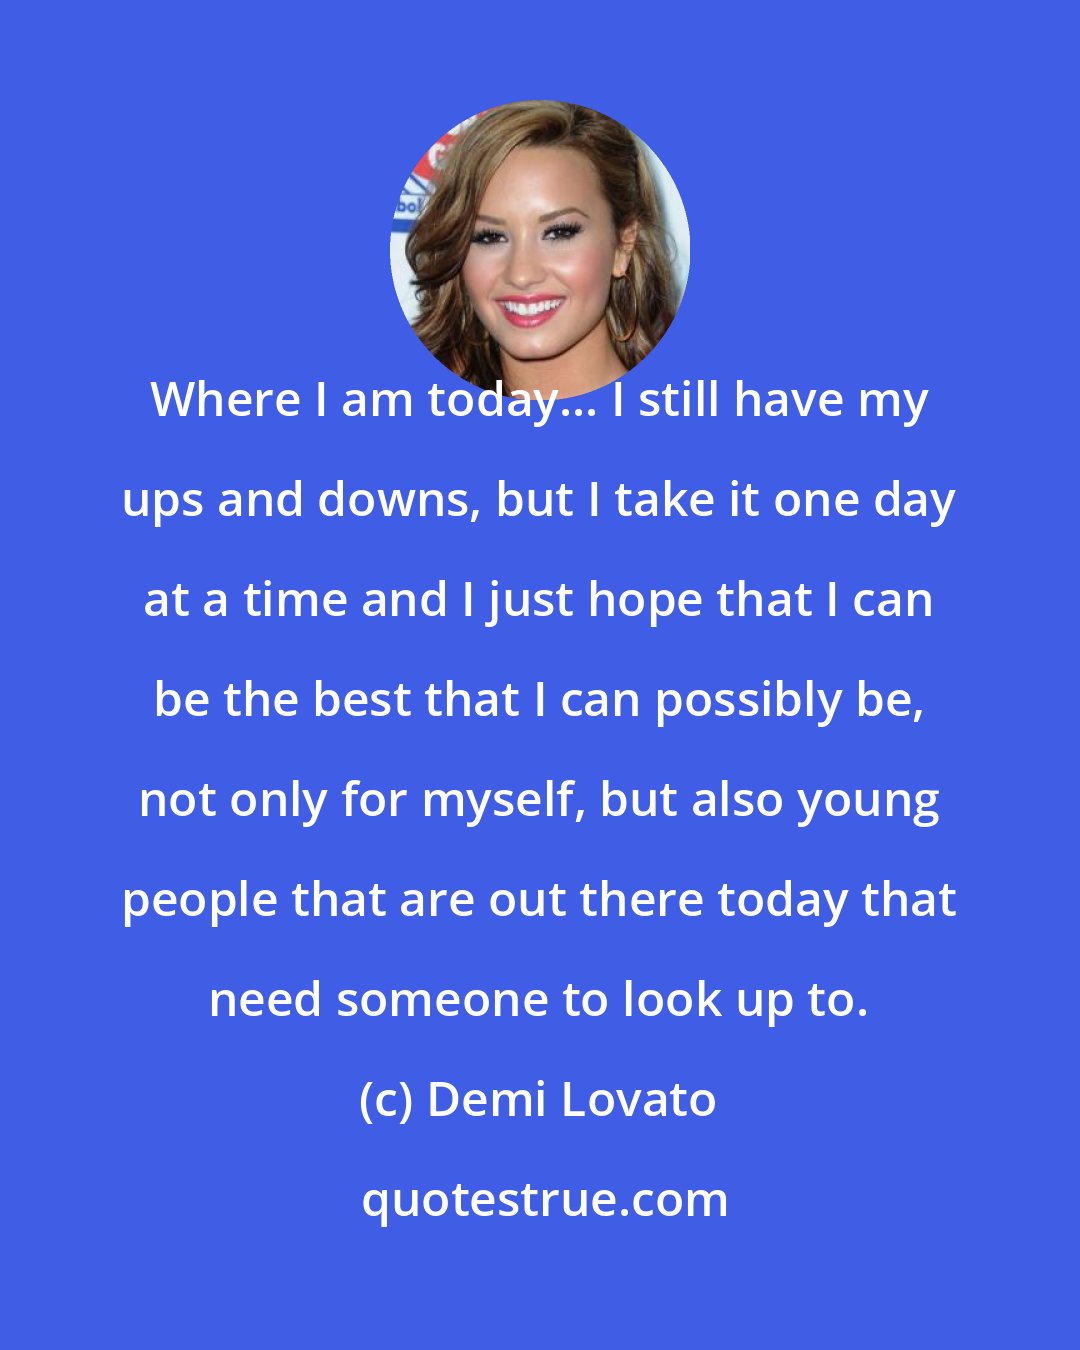 Demi Lovato: Where I am today... I still have my ups and downs, but I take it one day at a time and I just hope that I can be the best that I can possibly be, not only for myself, but also young people that are out there today that need someone to look up to.